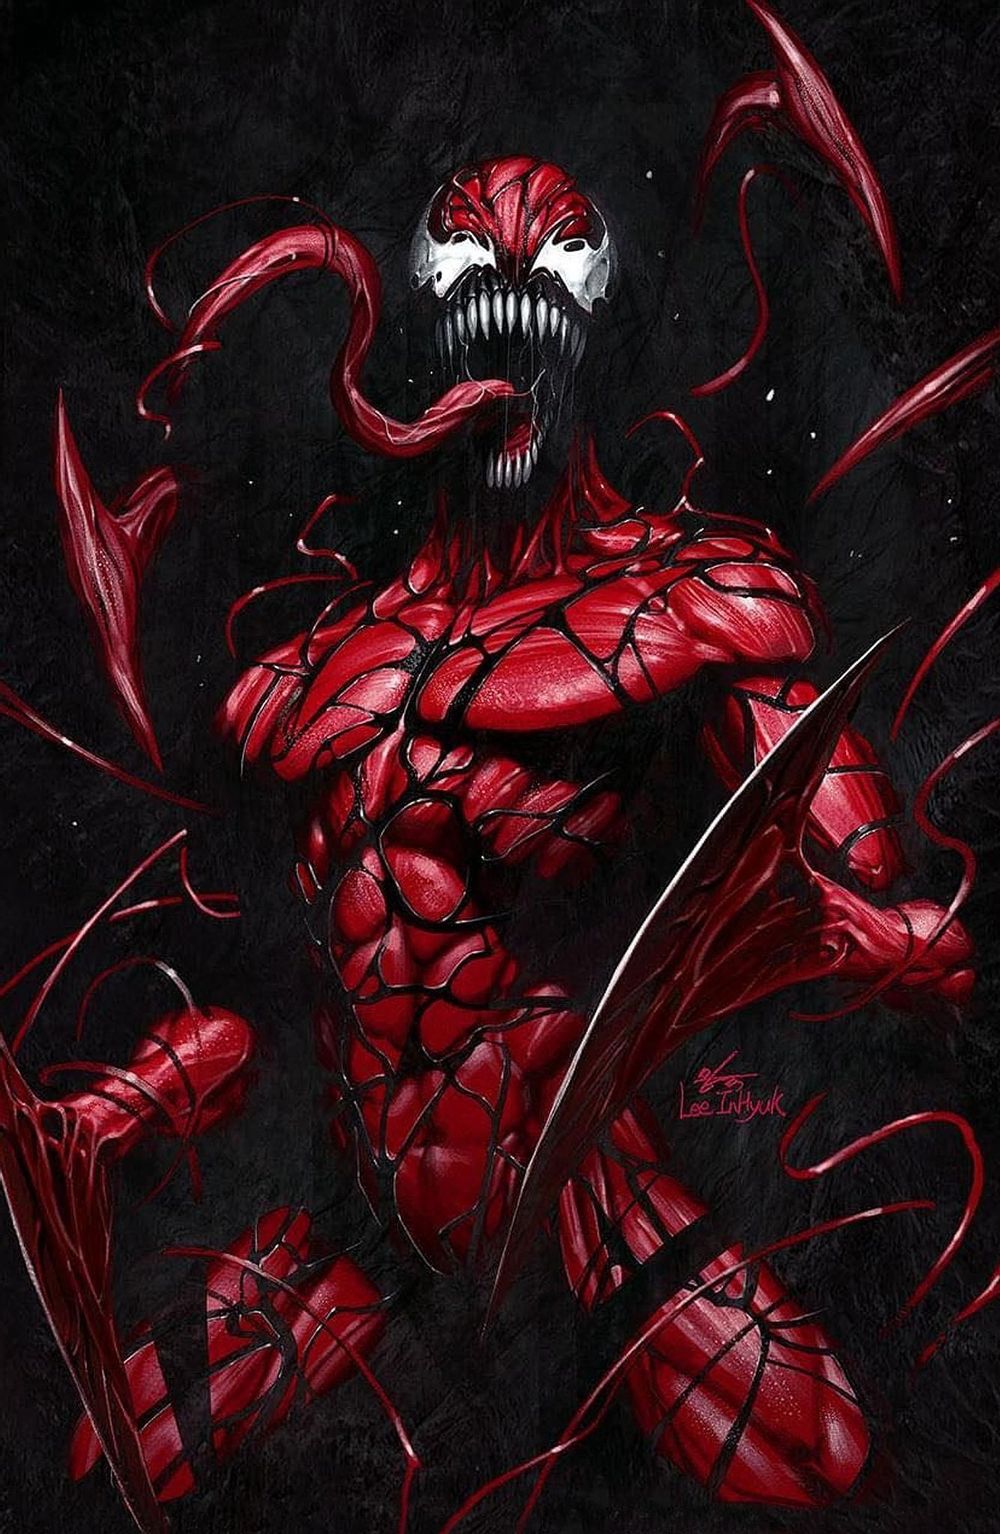 Venom Officially Becomes a Red Symbiote in Ultra-Powerful Rebirth